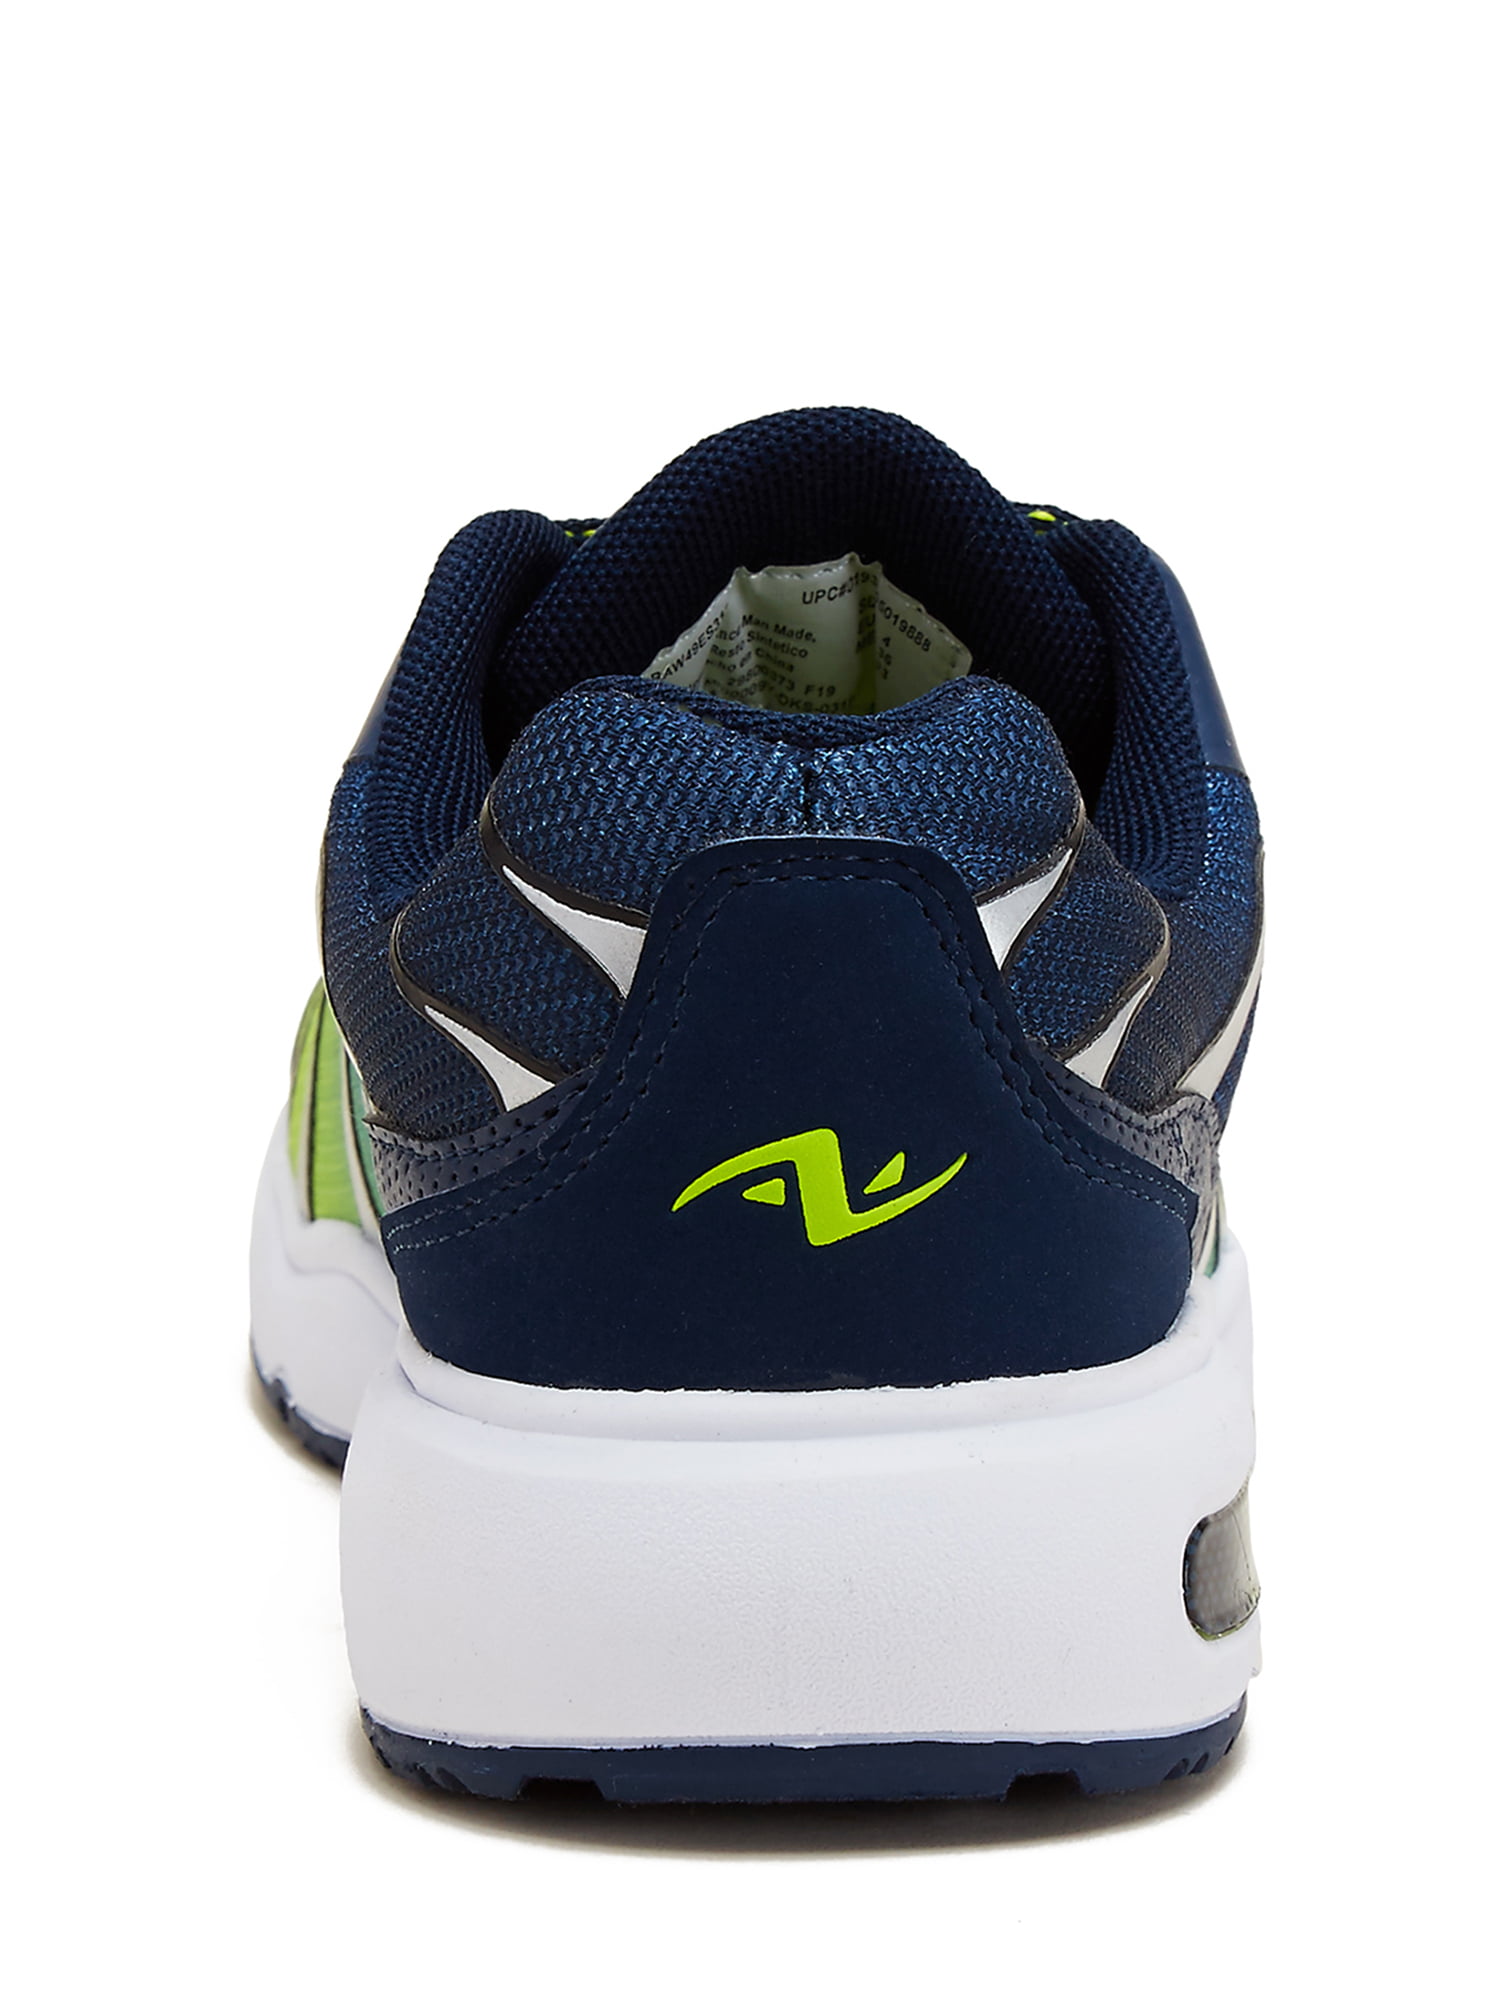 Details about   Athletic Works Toddler Boys' Flame Shoes 